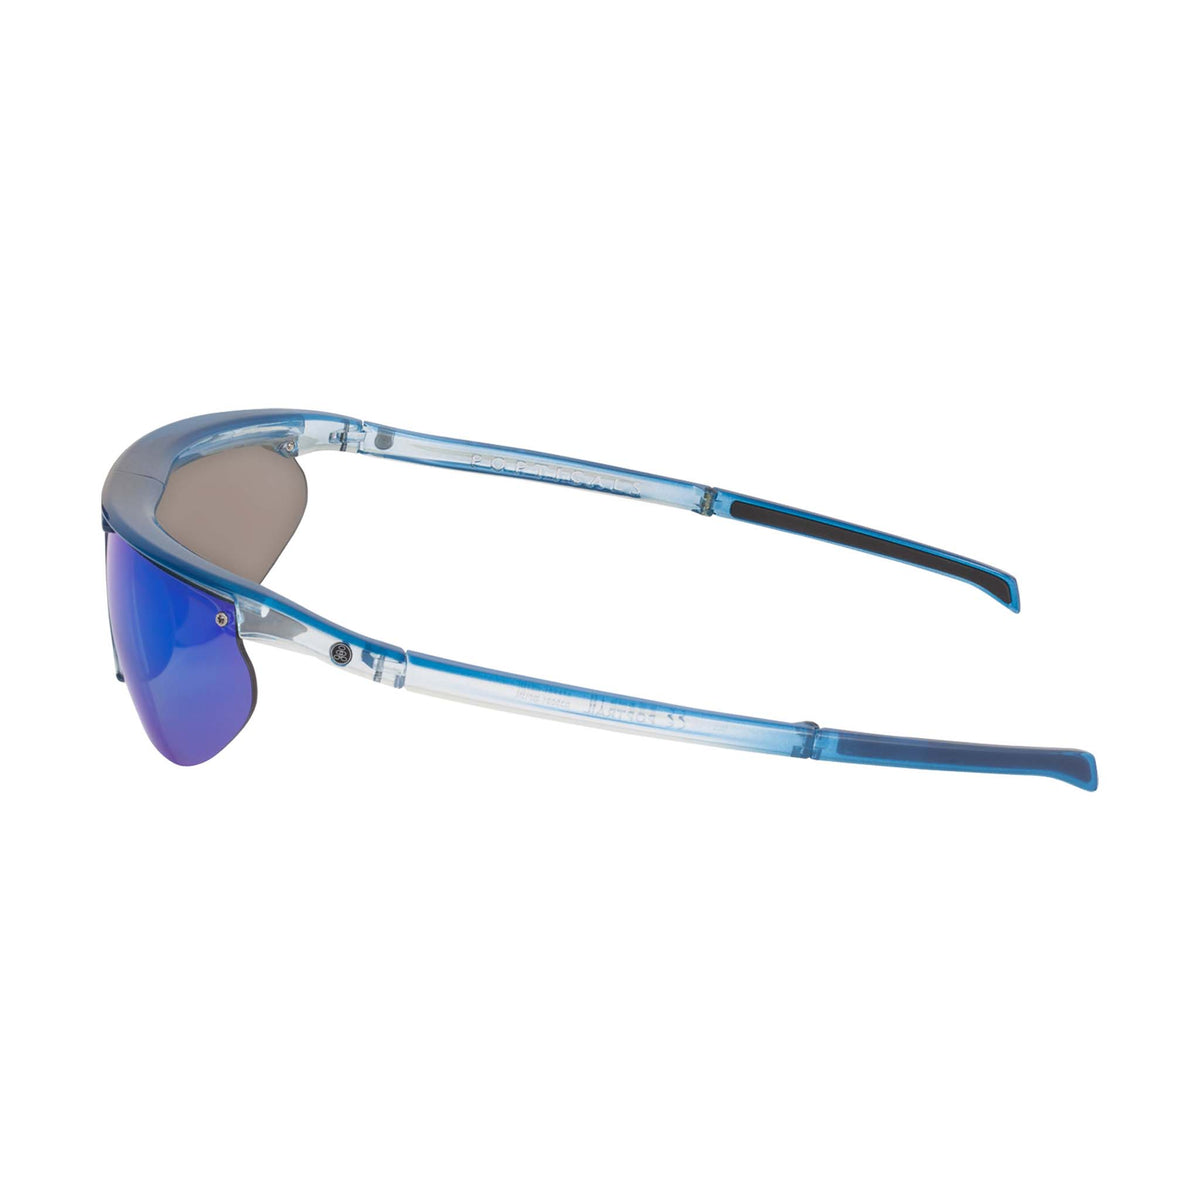 Popticals, Premium Compact Sunglasses, PopTrail, 030081-BFUN, Polarized Sunglasses, Gloss Blue over Crystal Frame, Gray Lenses w/Blue Mirror Finish, Side View